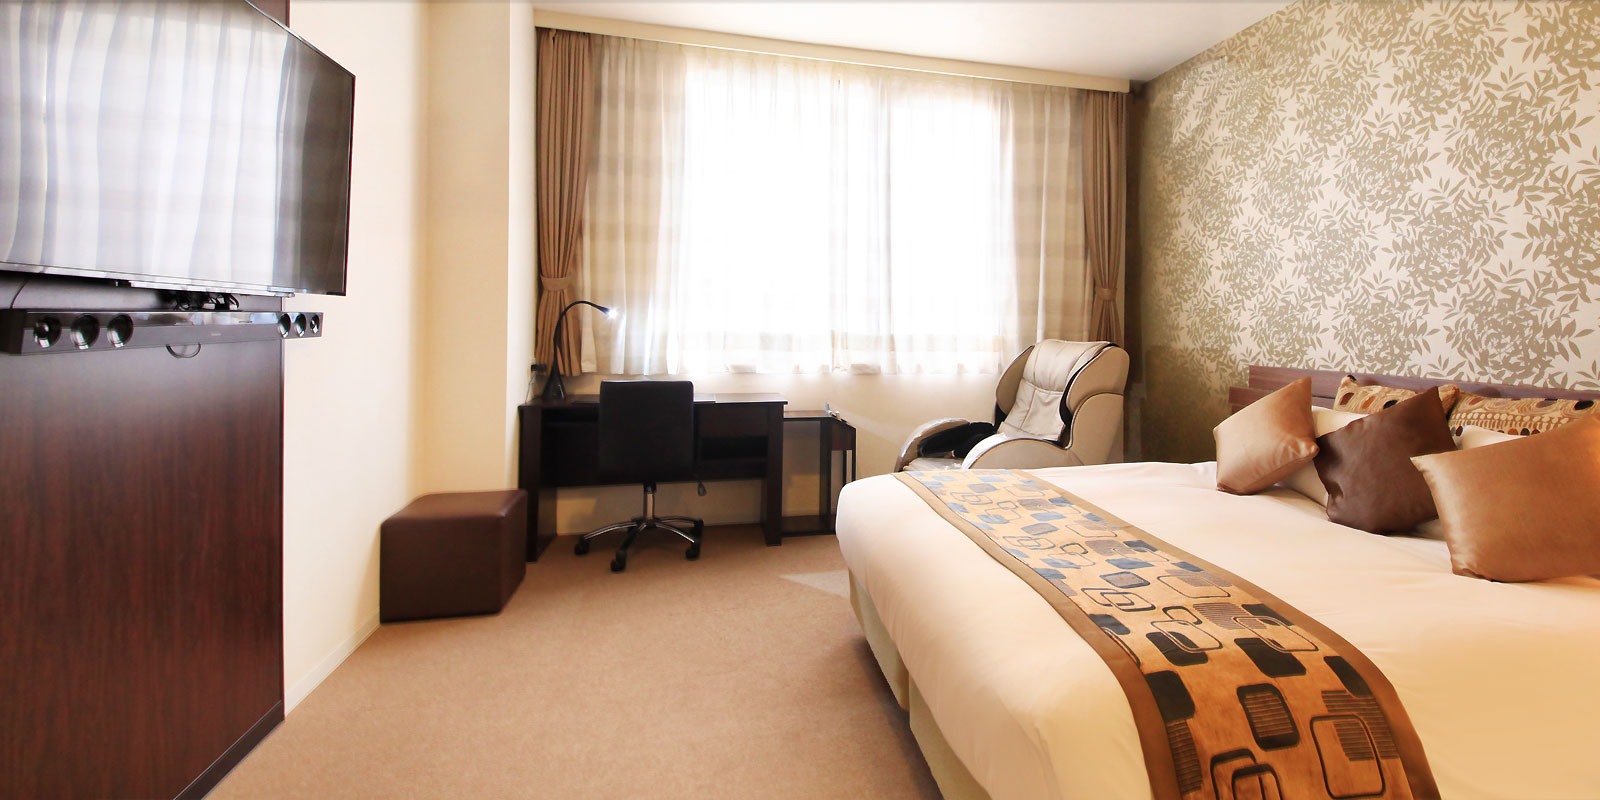 Carefully appointed rooms with simplistic decor.